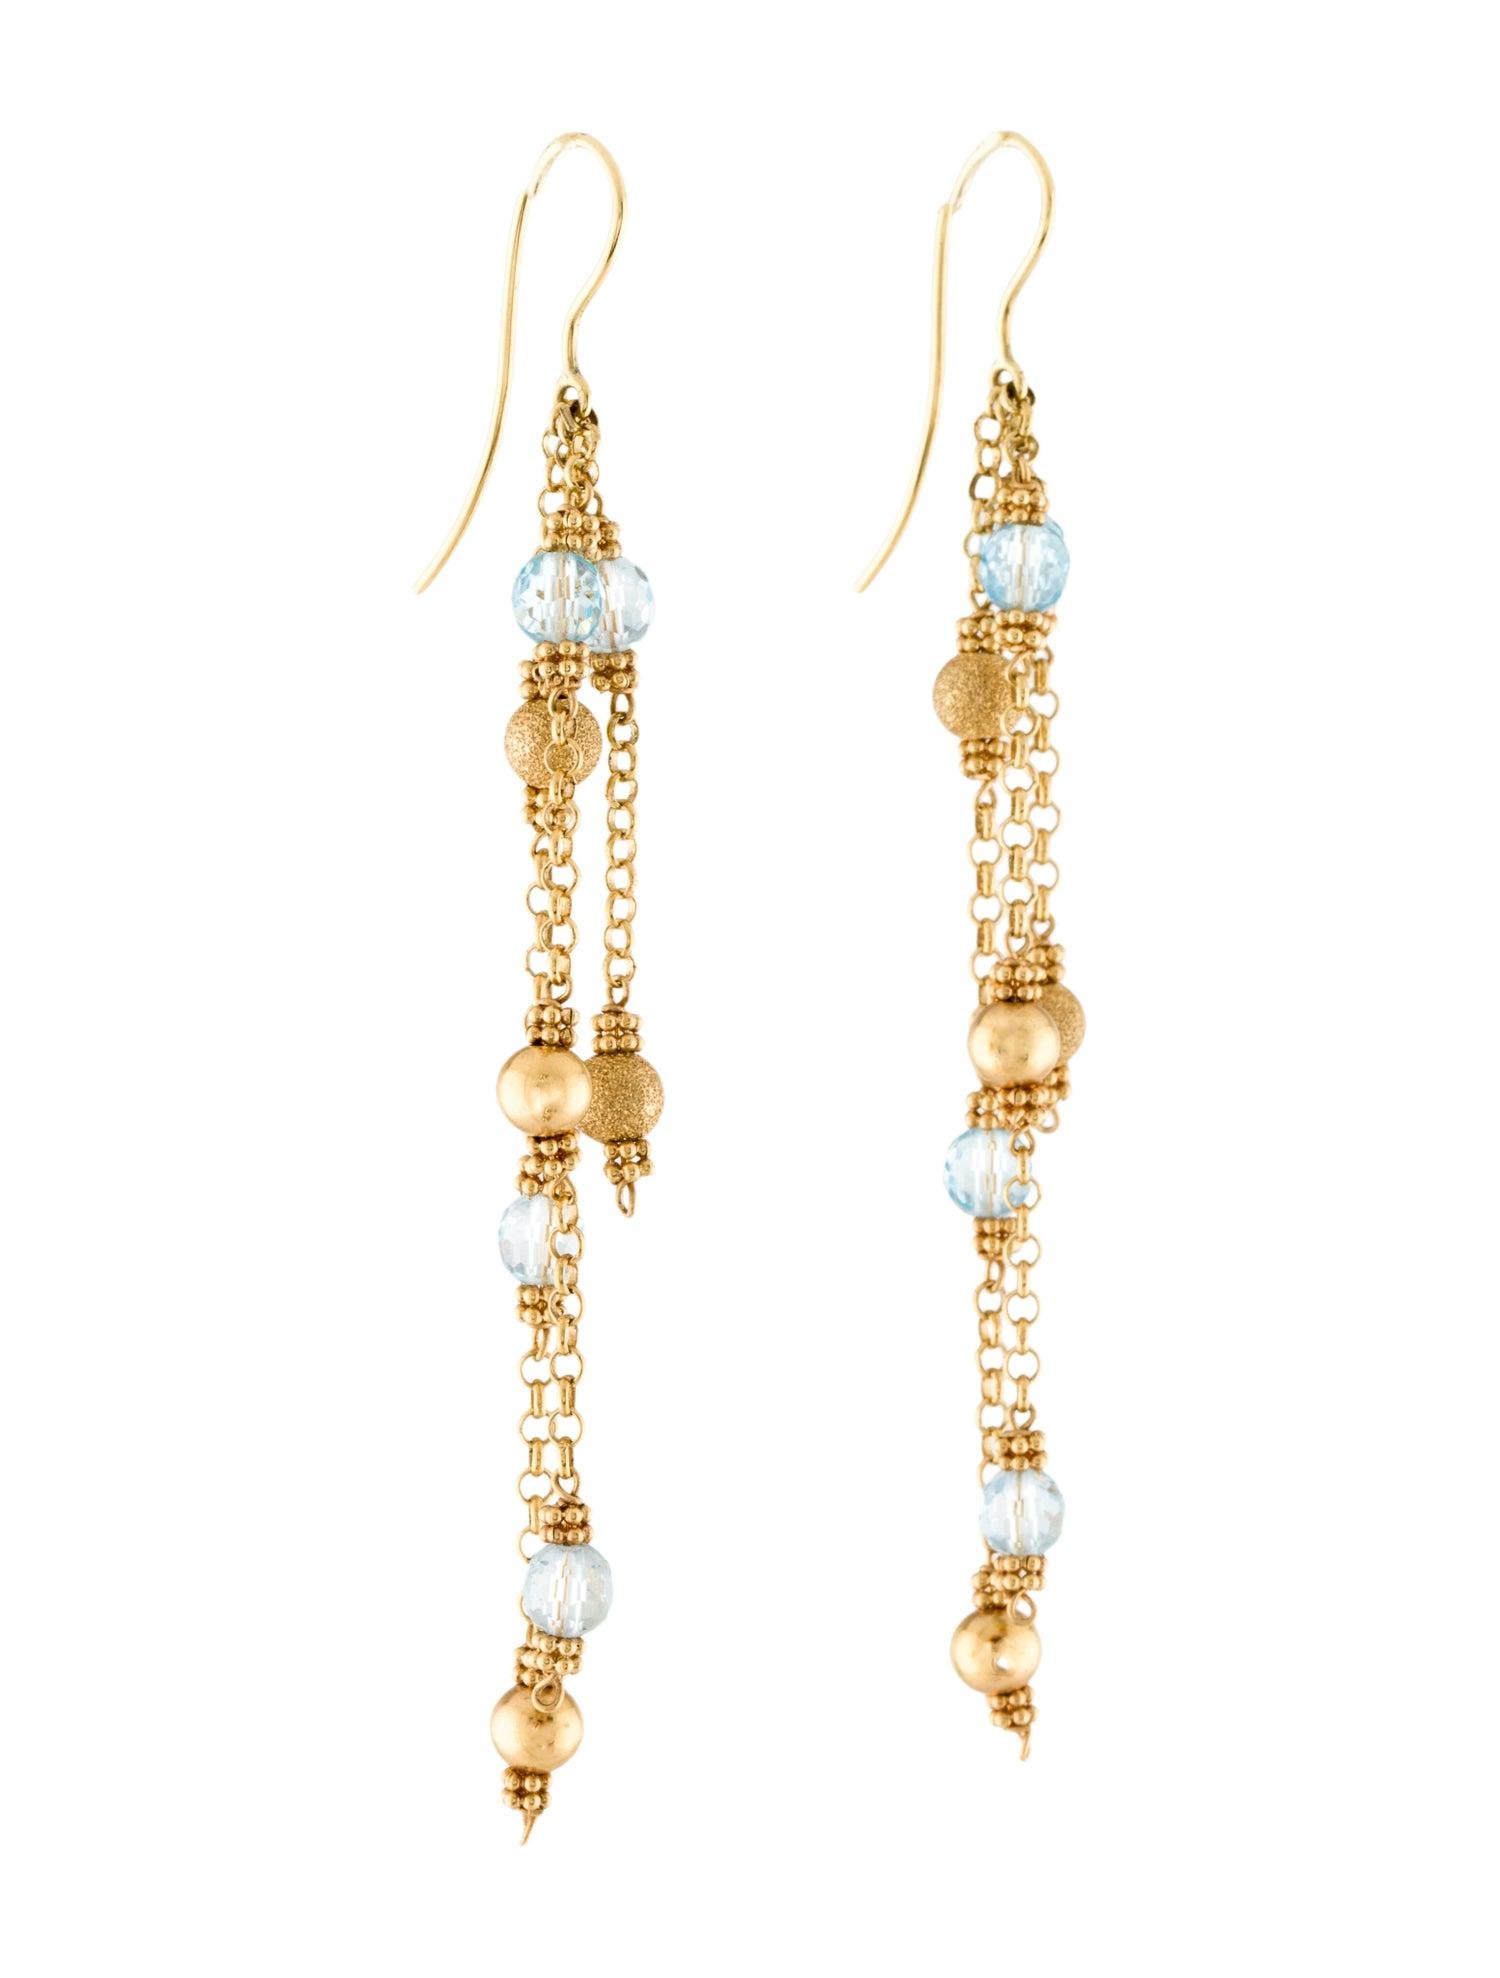 These playful dangle earrings are sure to add a pop of color to any outfit. Expertly crafted from 18 karat yellow gold, the earrings feature faceted blue topaz beads and textured gold beads in a combination of satin and sand finishes. The